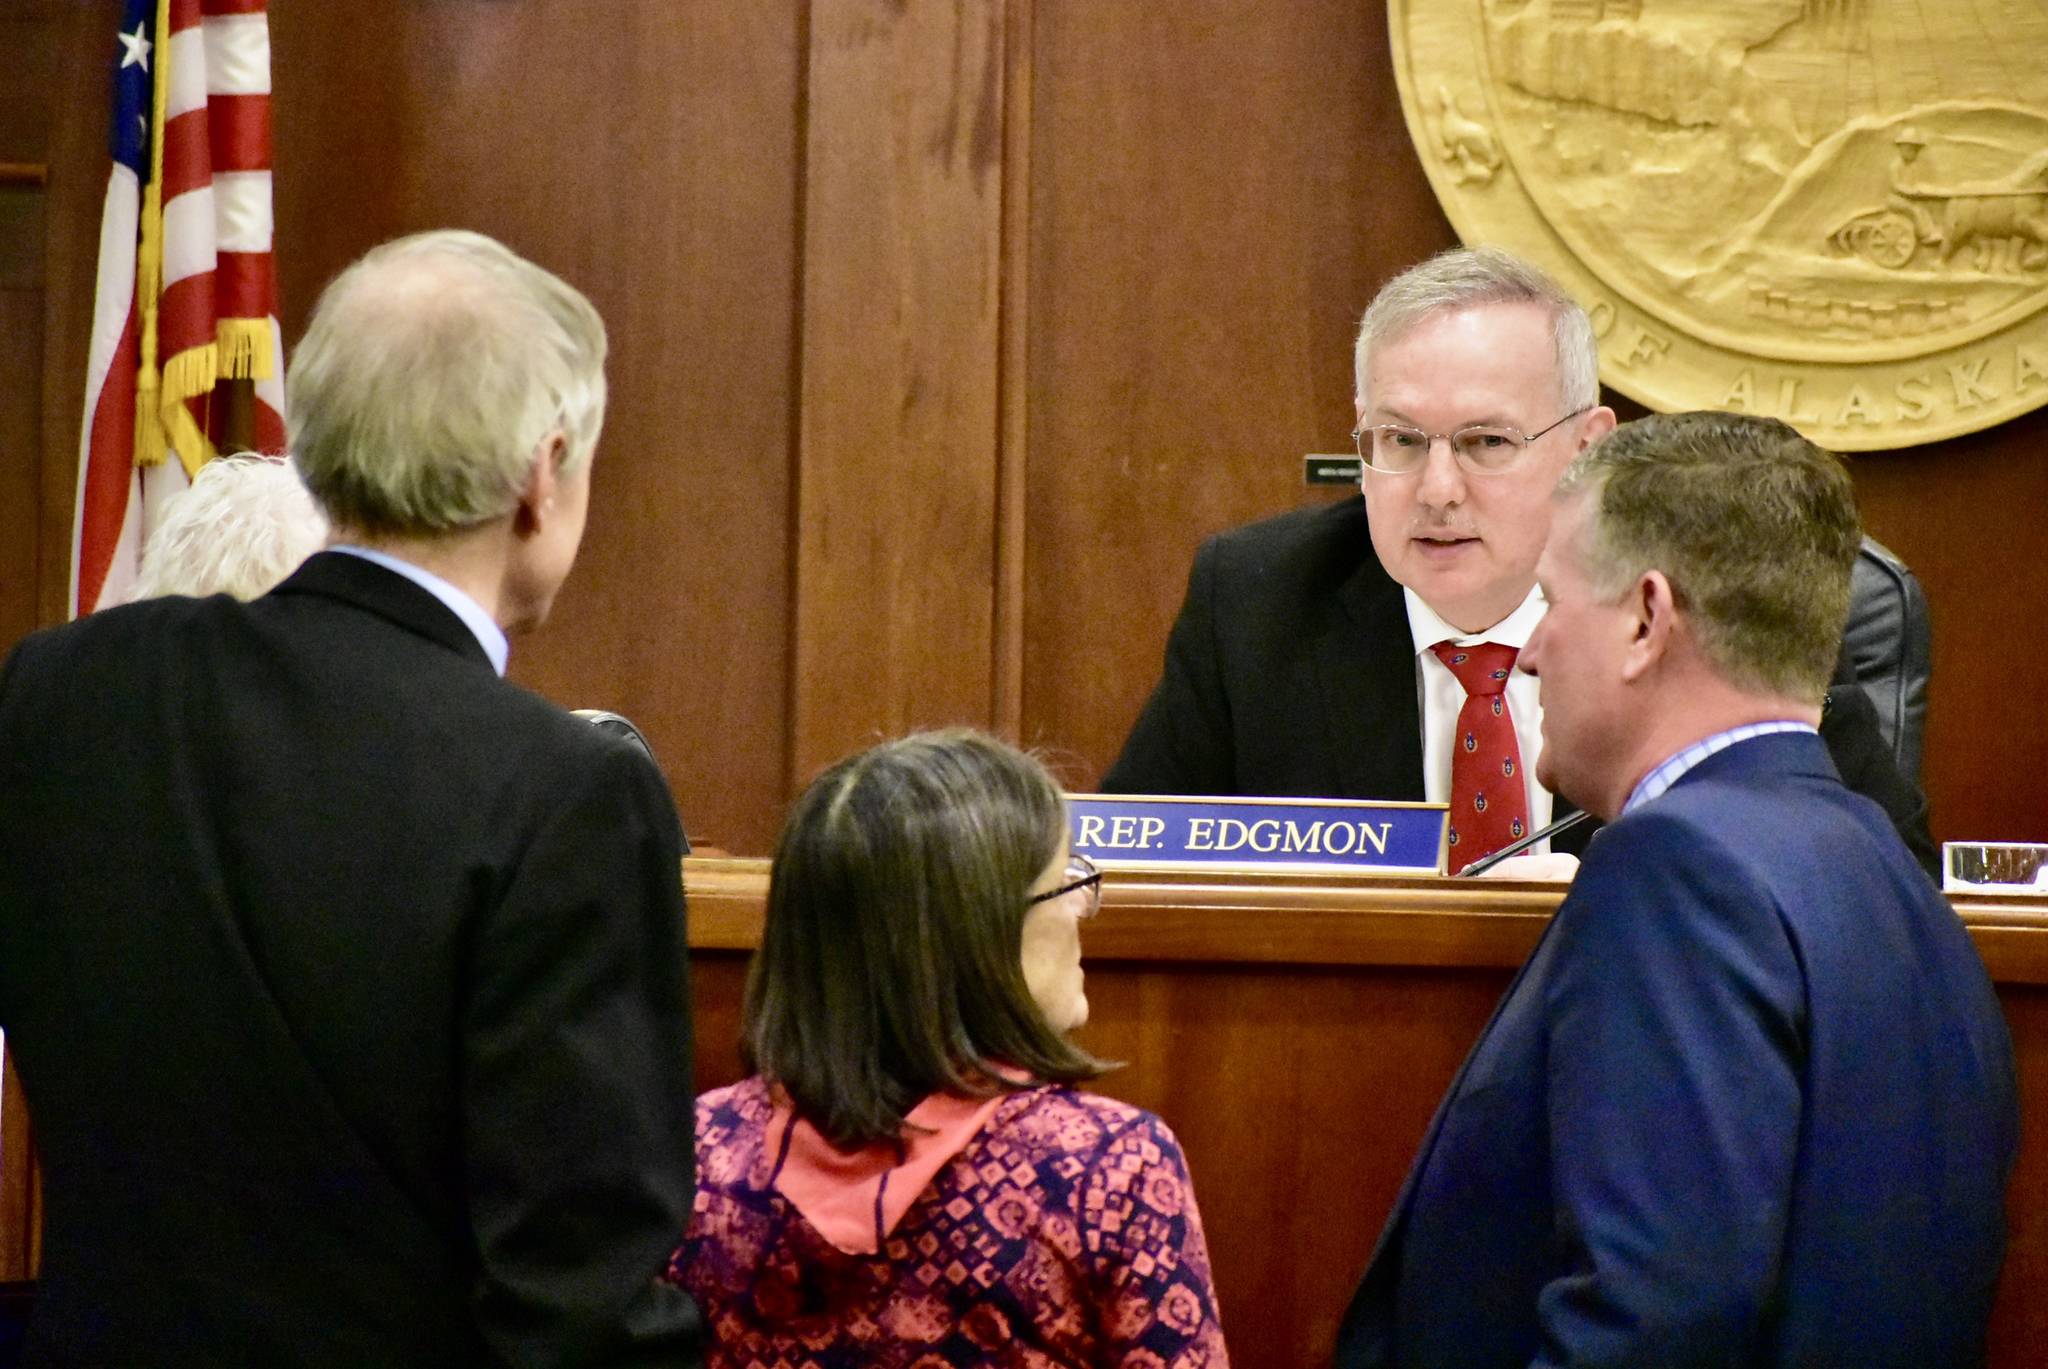 House Speaker Rep. Bryce Edgmon, I-Dillingham, seated, speaks with other members of the House during an at ease on Monday, March 16, 2020. (Peter Segall | Juneau Empire)